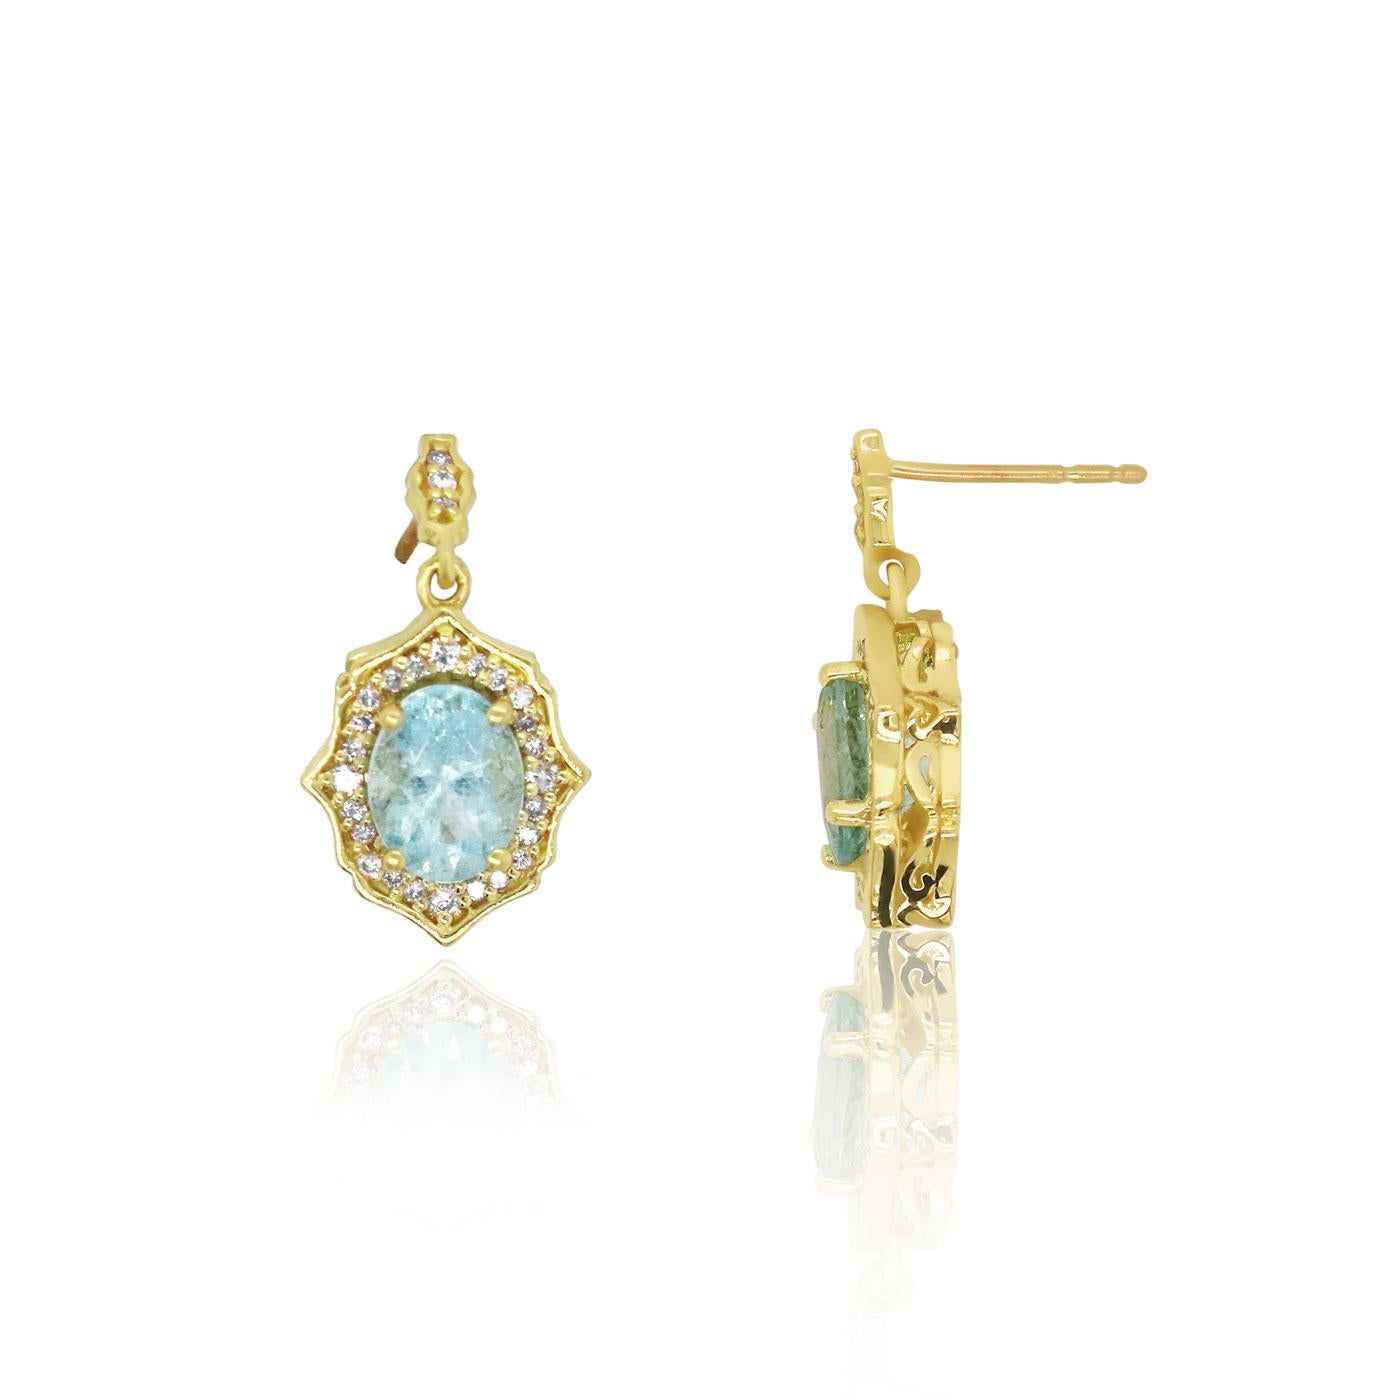 Stones: Oval Paraiba Tourmaline at 2.32 Carats Total Weight
Accent Stones: 62 Round Brilliant Diamonds at 0.33 Carats Total Weight - Color- SI/ Clarity: H-I
Metal: 18K Yellow Gold

Fine one-of-a-kind craftsmanship meets incredible quality in this